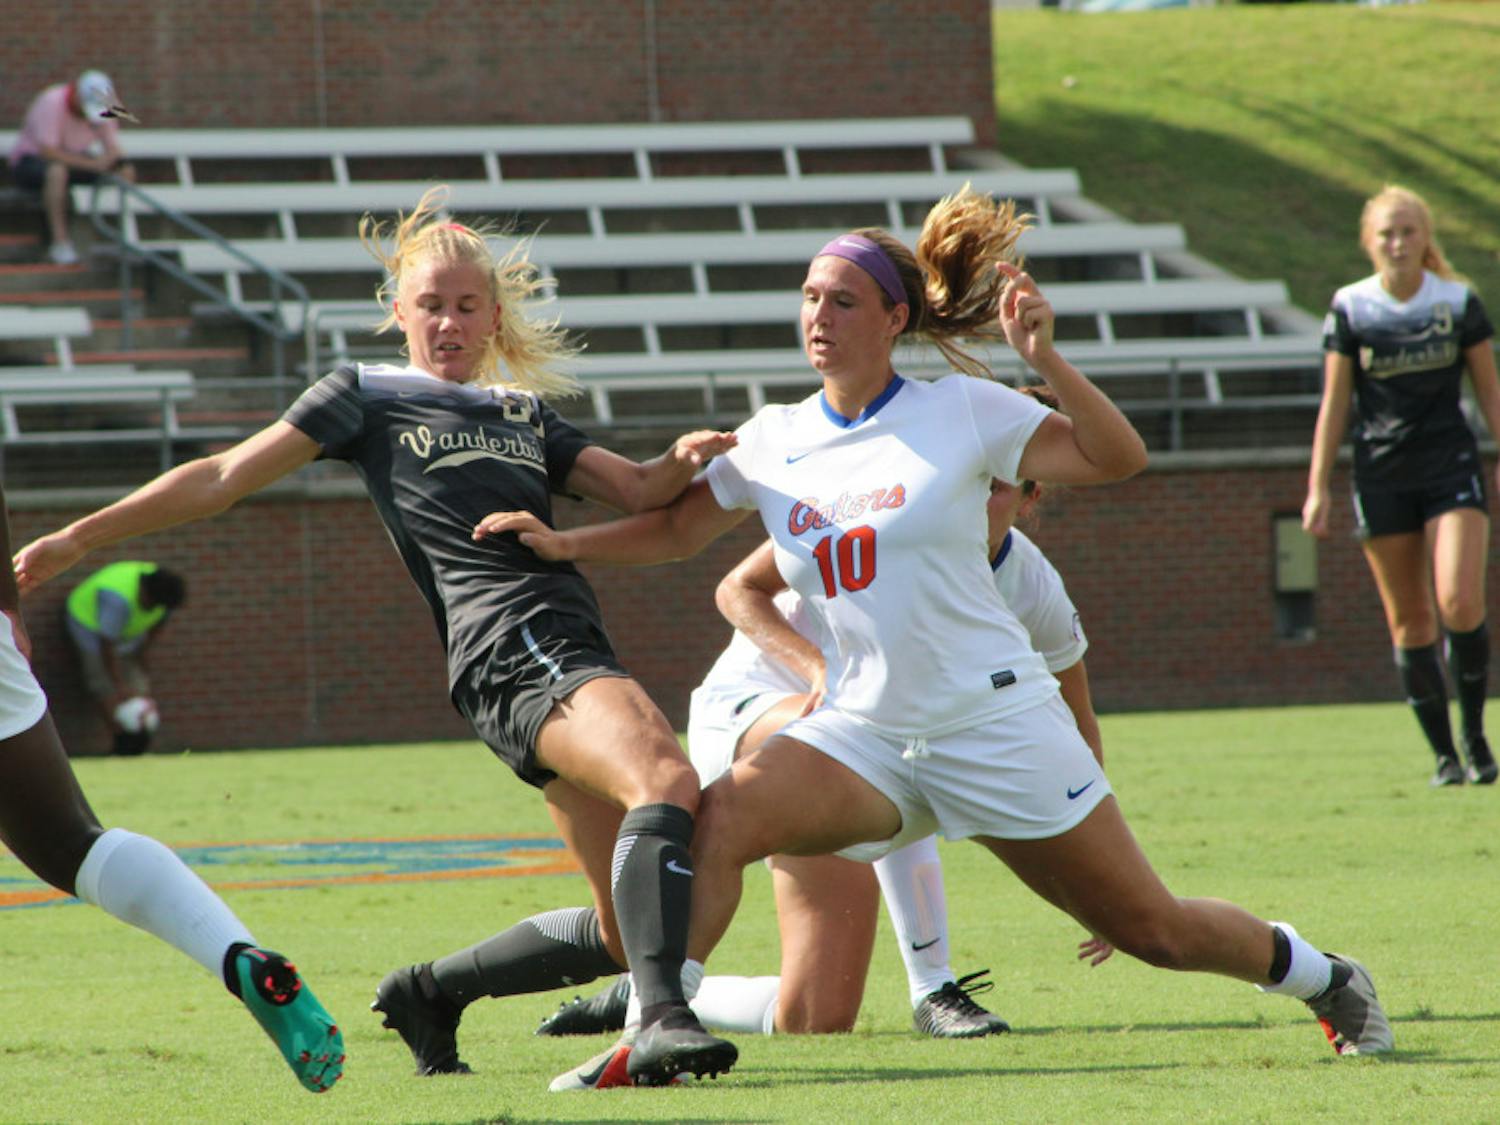 Midfielder Tess Sapone notched the lone goal in Florida’s 1-0 win over Georgia on Thursday night. The goal snapped a four-game scoreless streak.